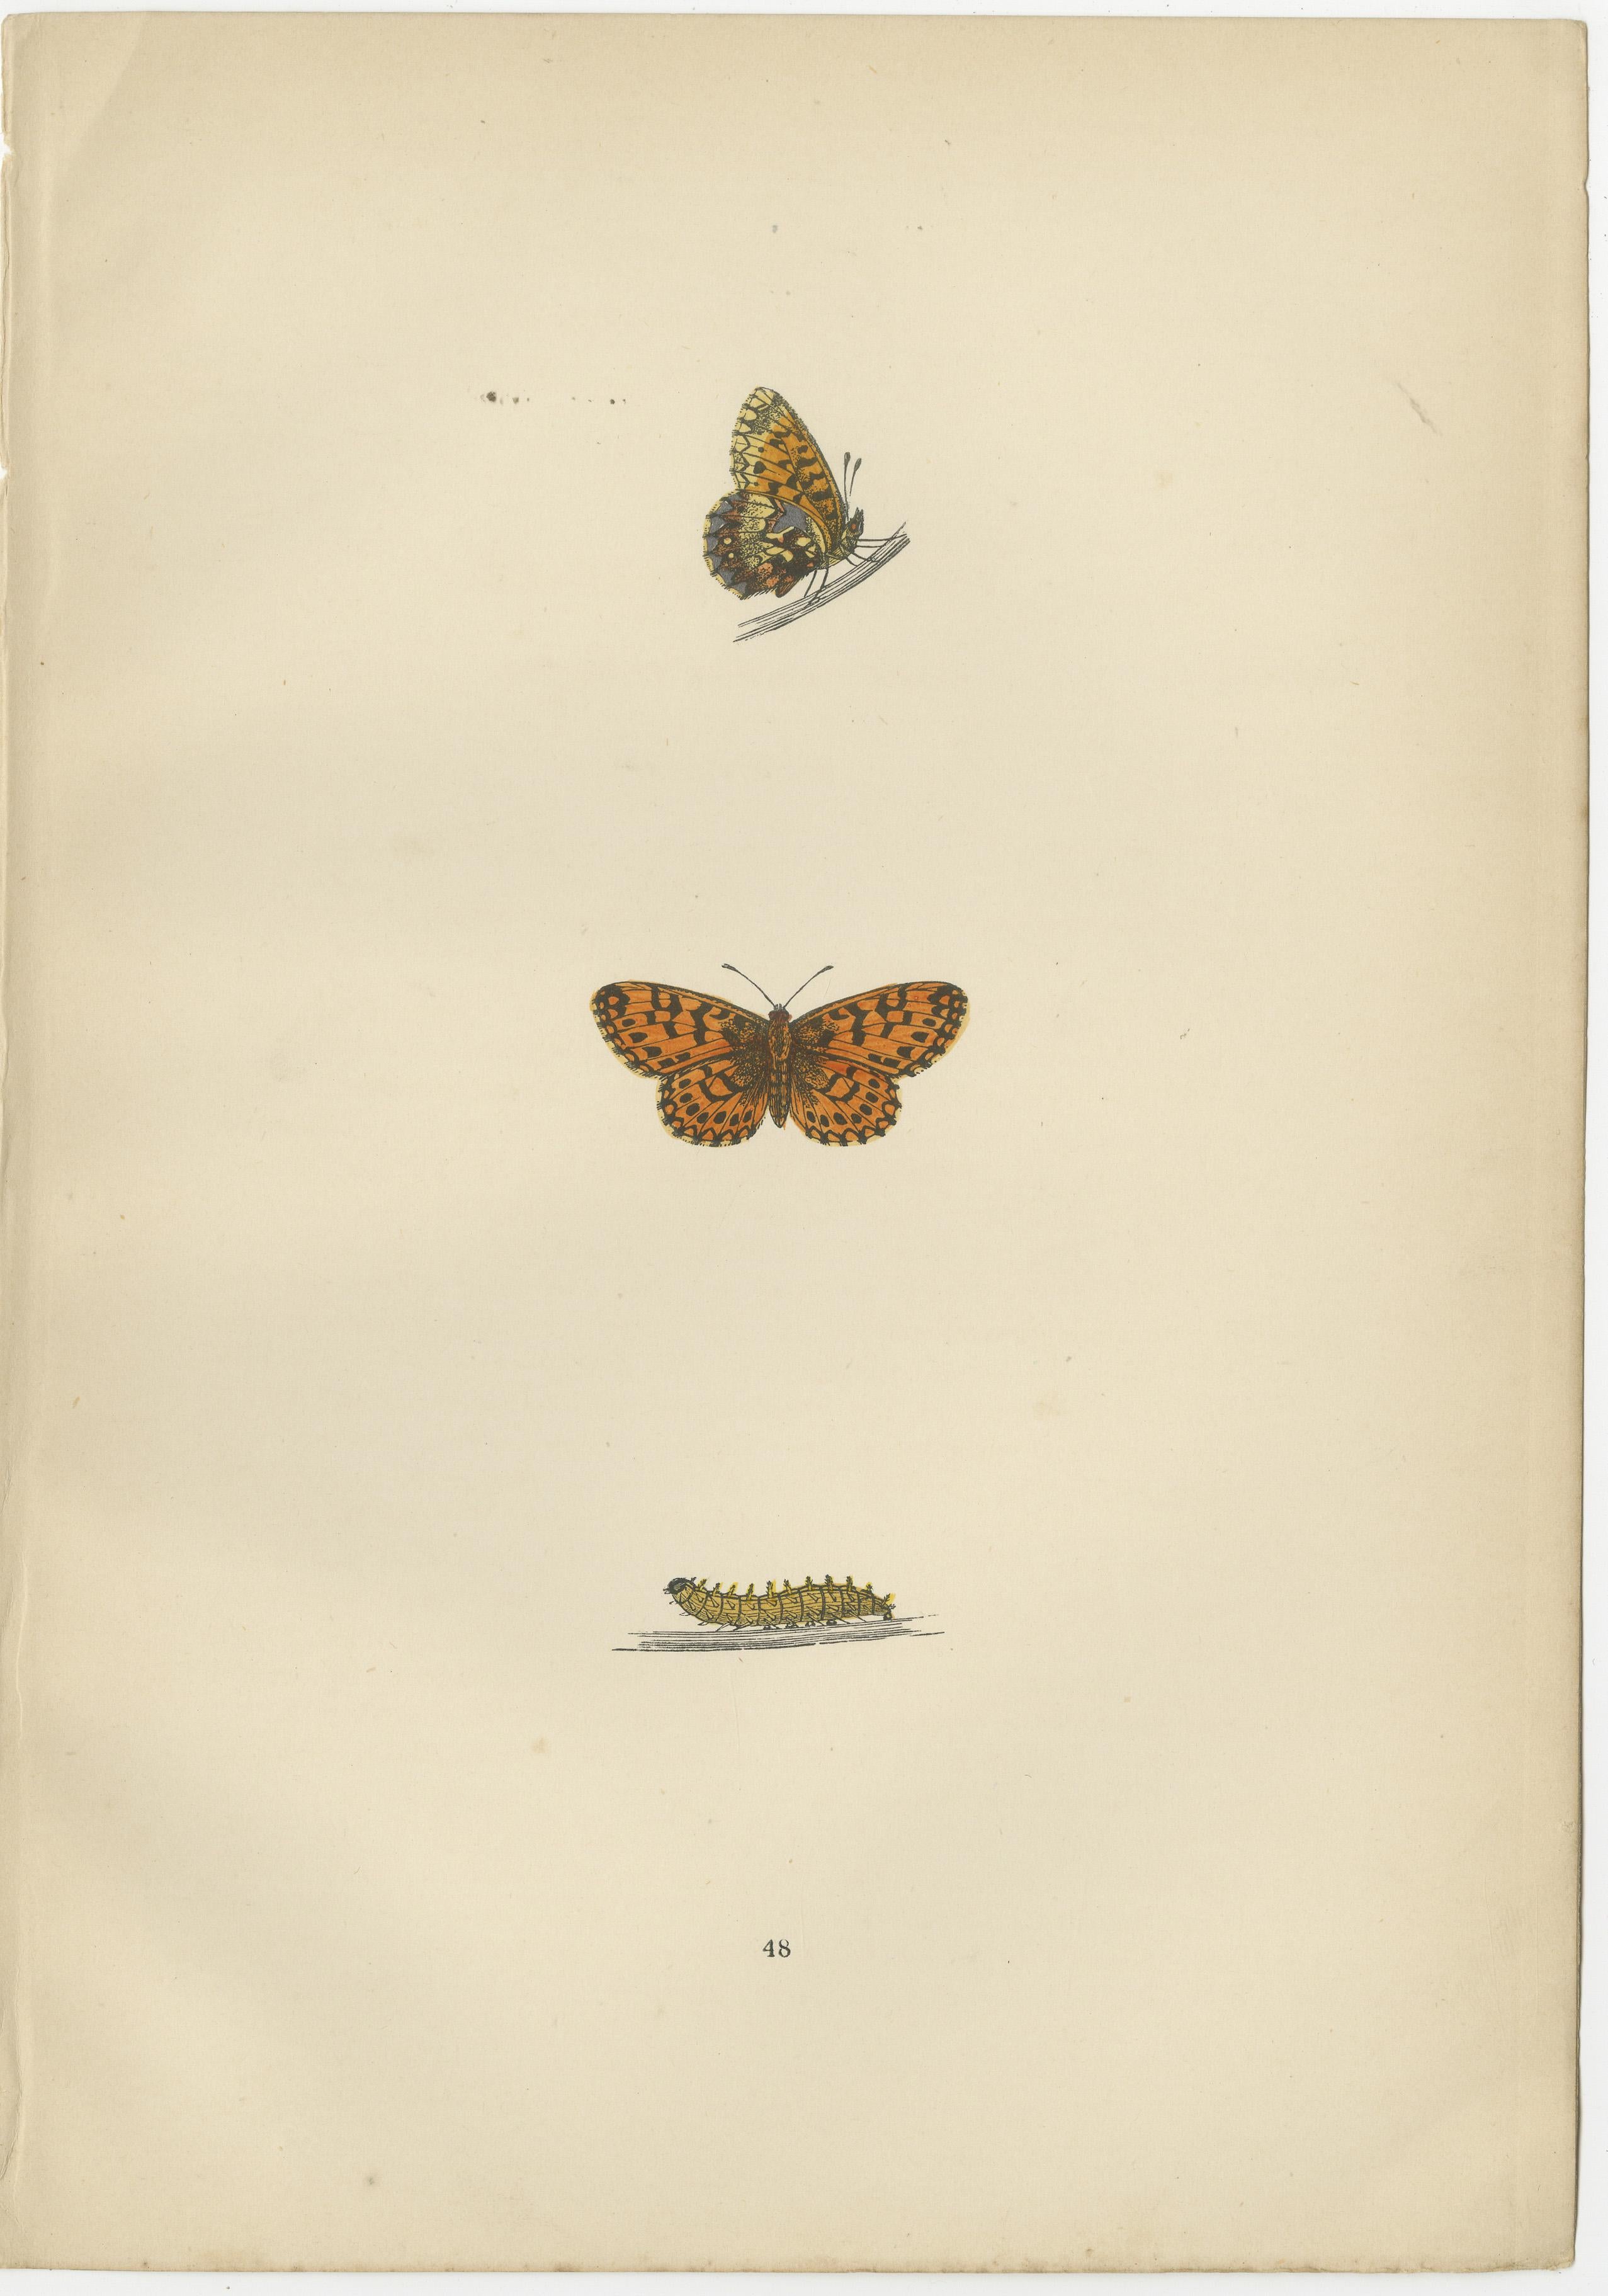 Late 19th Century Flight of Patterns: The Fritillary Trilogy from Morris's 1890 Masterpiece For Sale